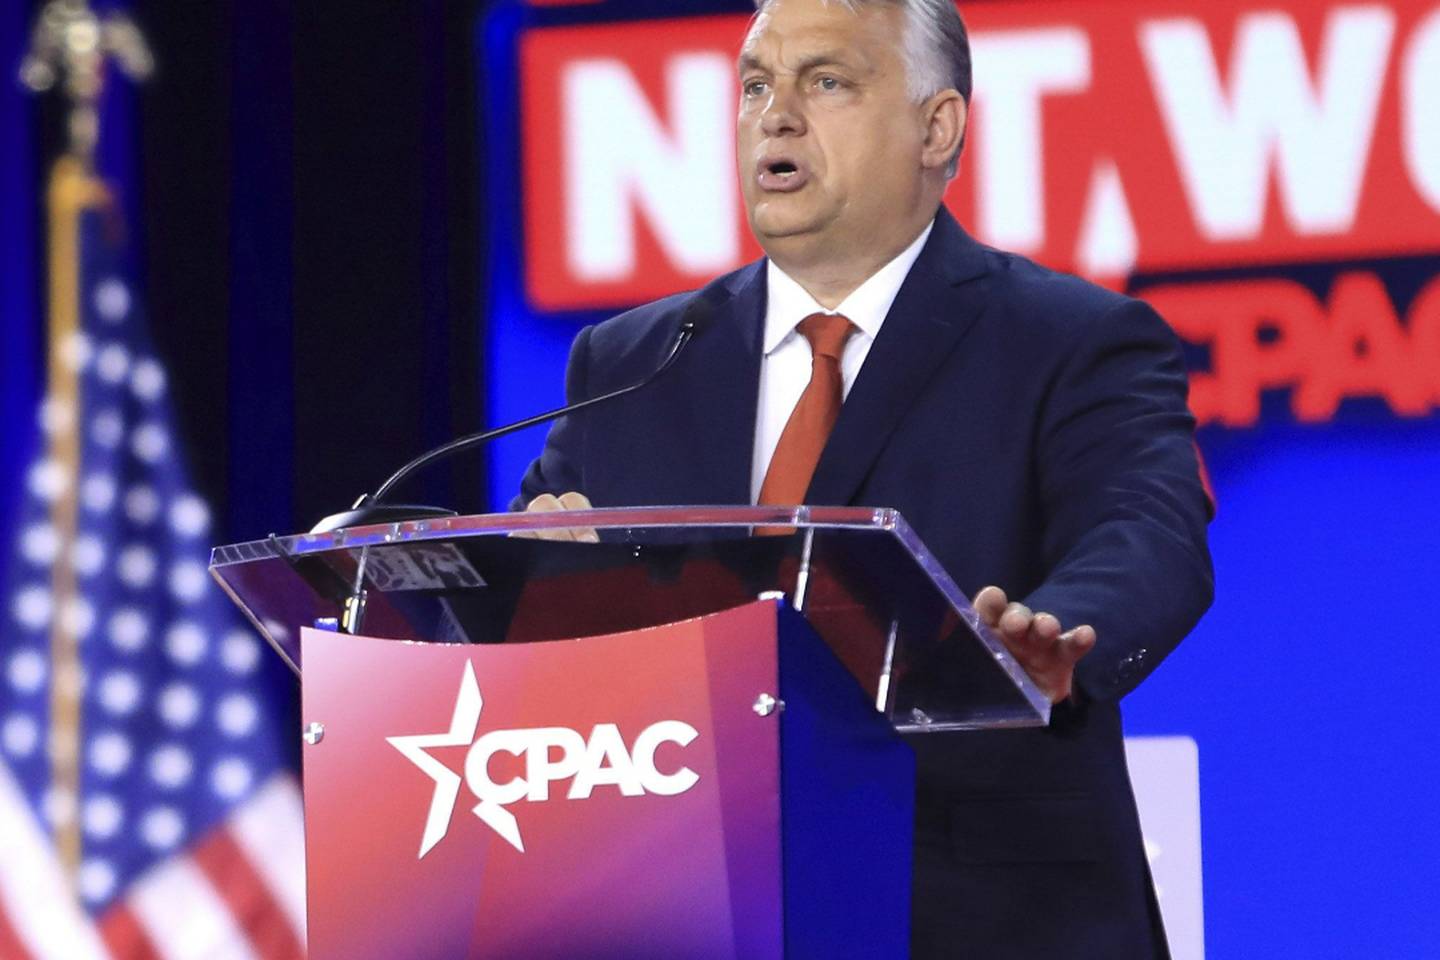 Viktor Orban urges Hungary and US to join forces and defend Christianity